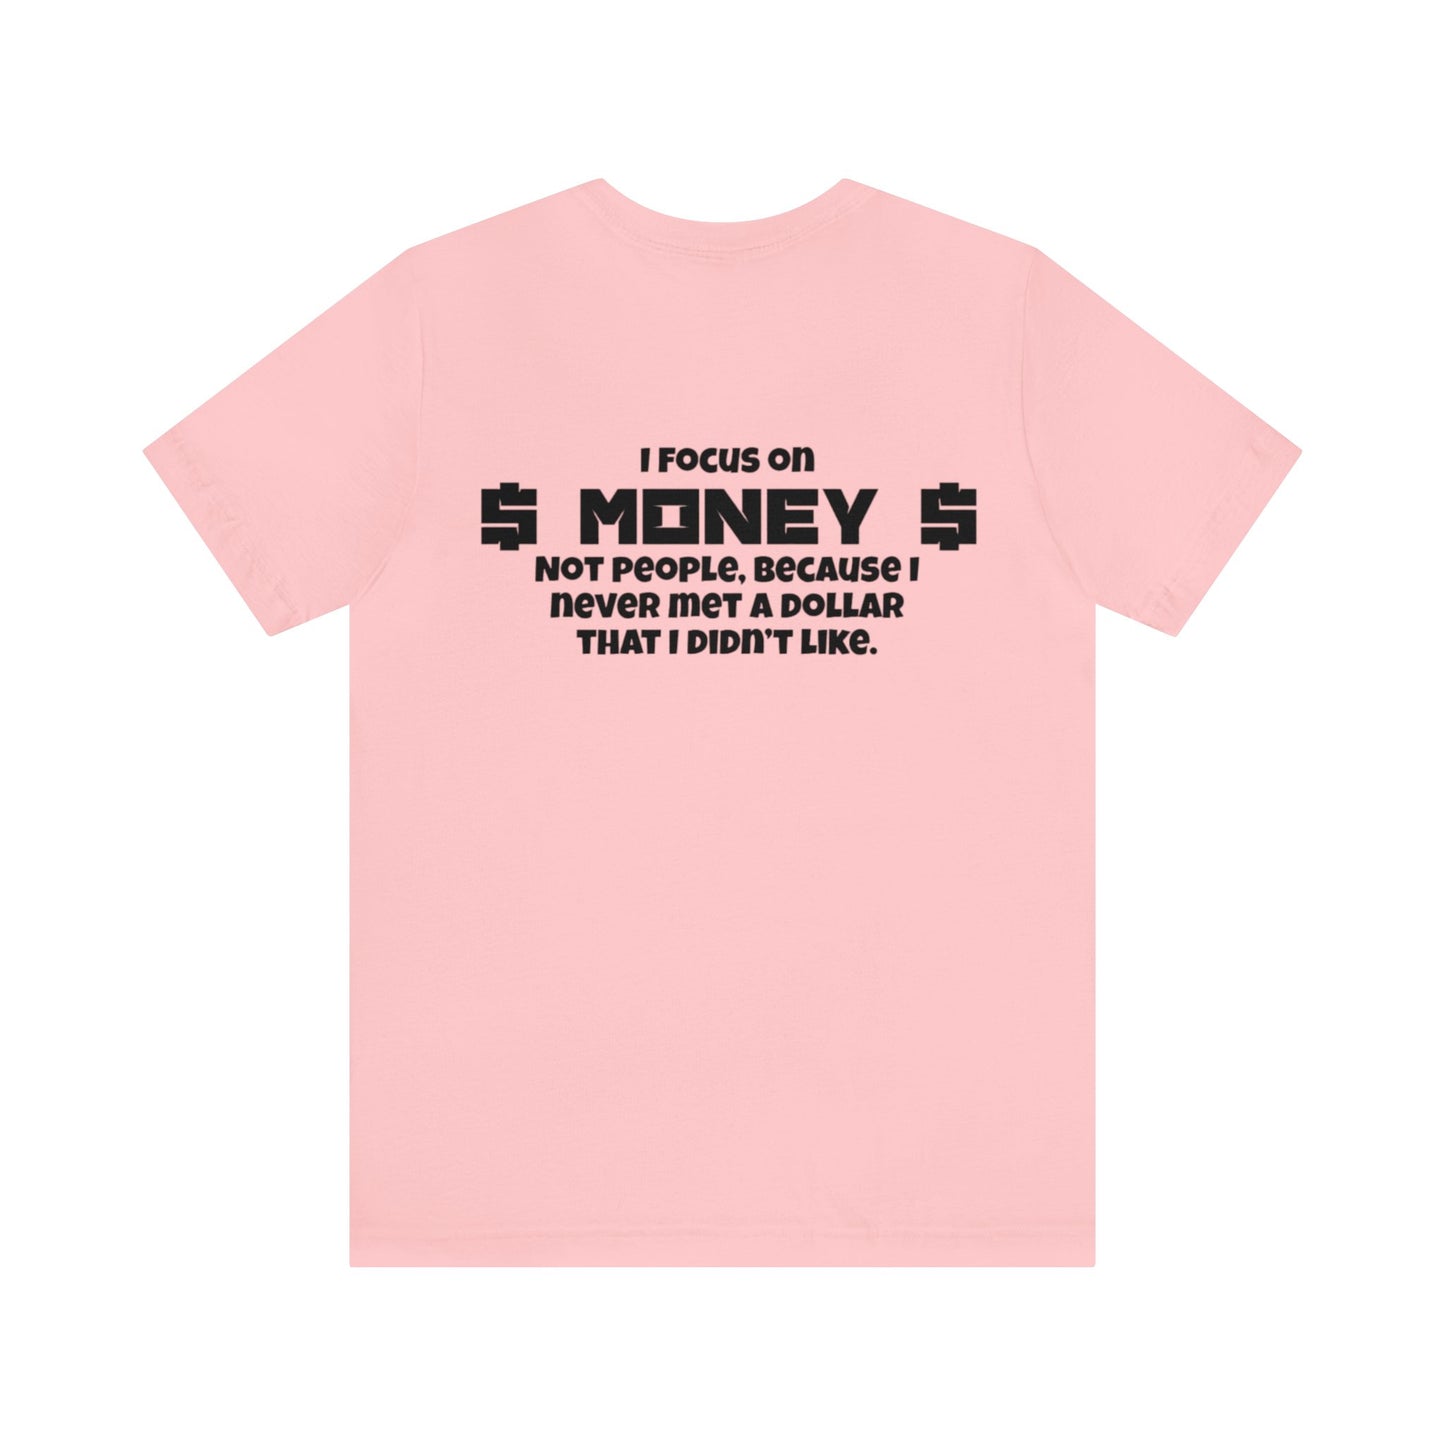 Jazzy Ohlai®️  Classic T-Shirt